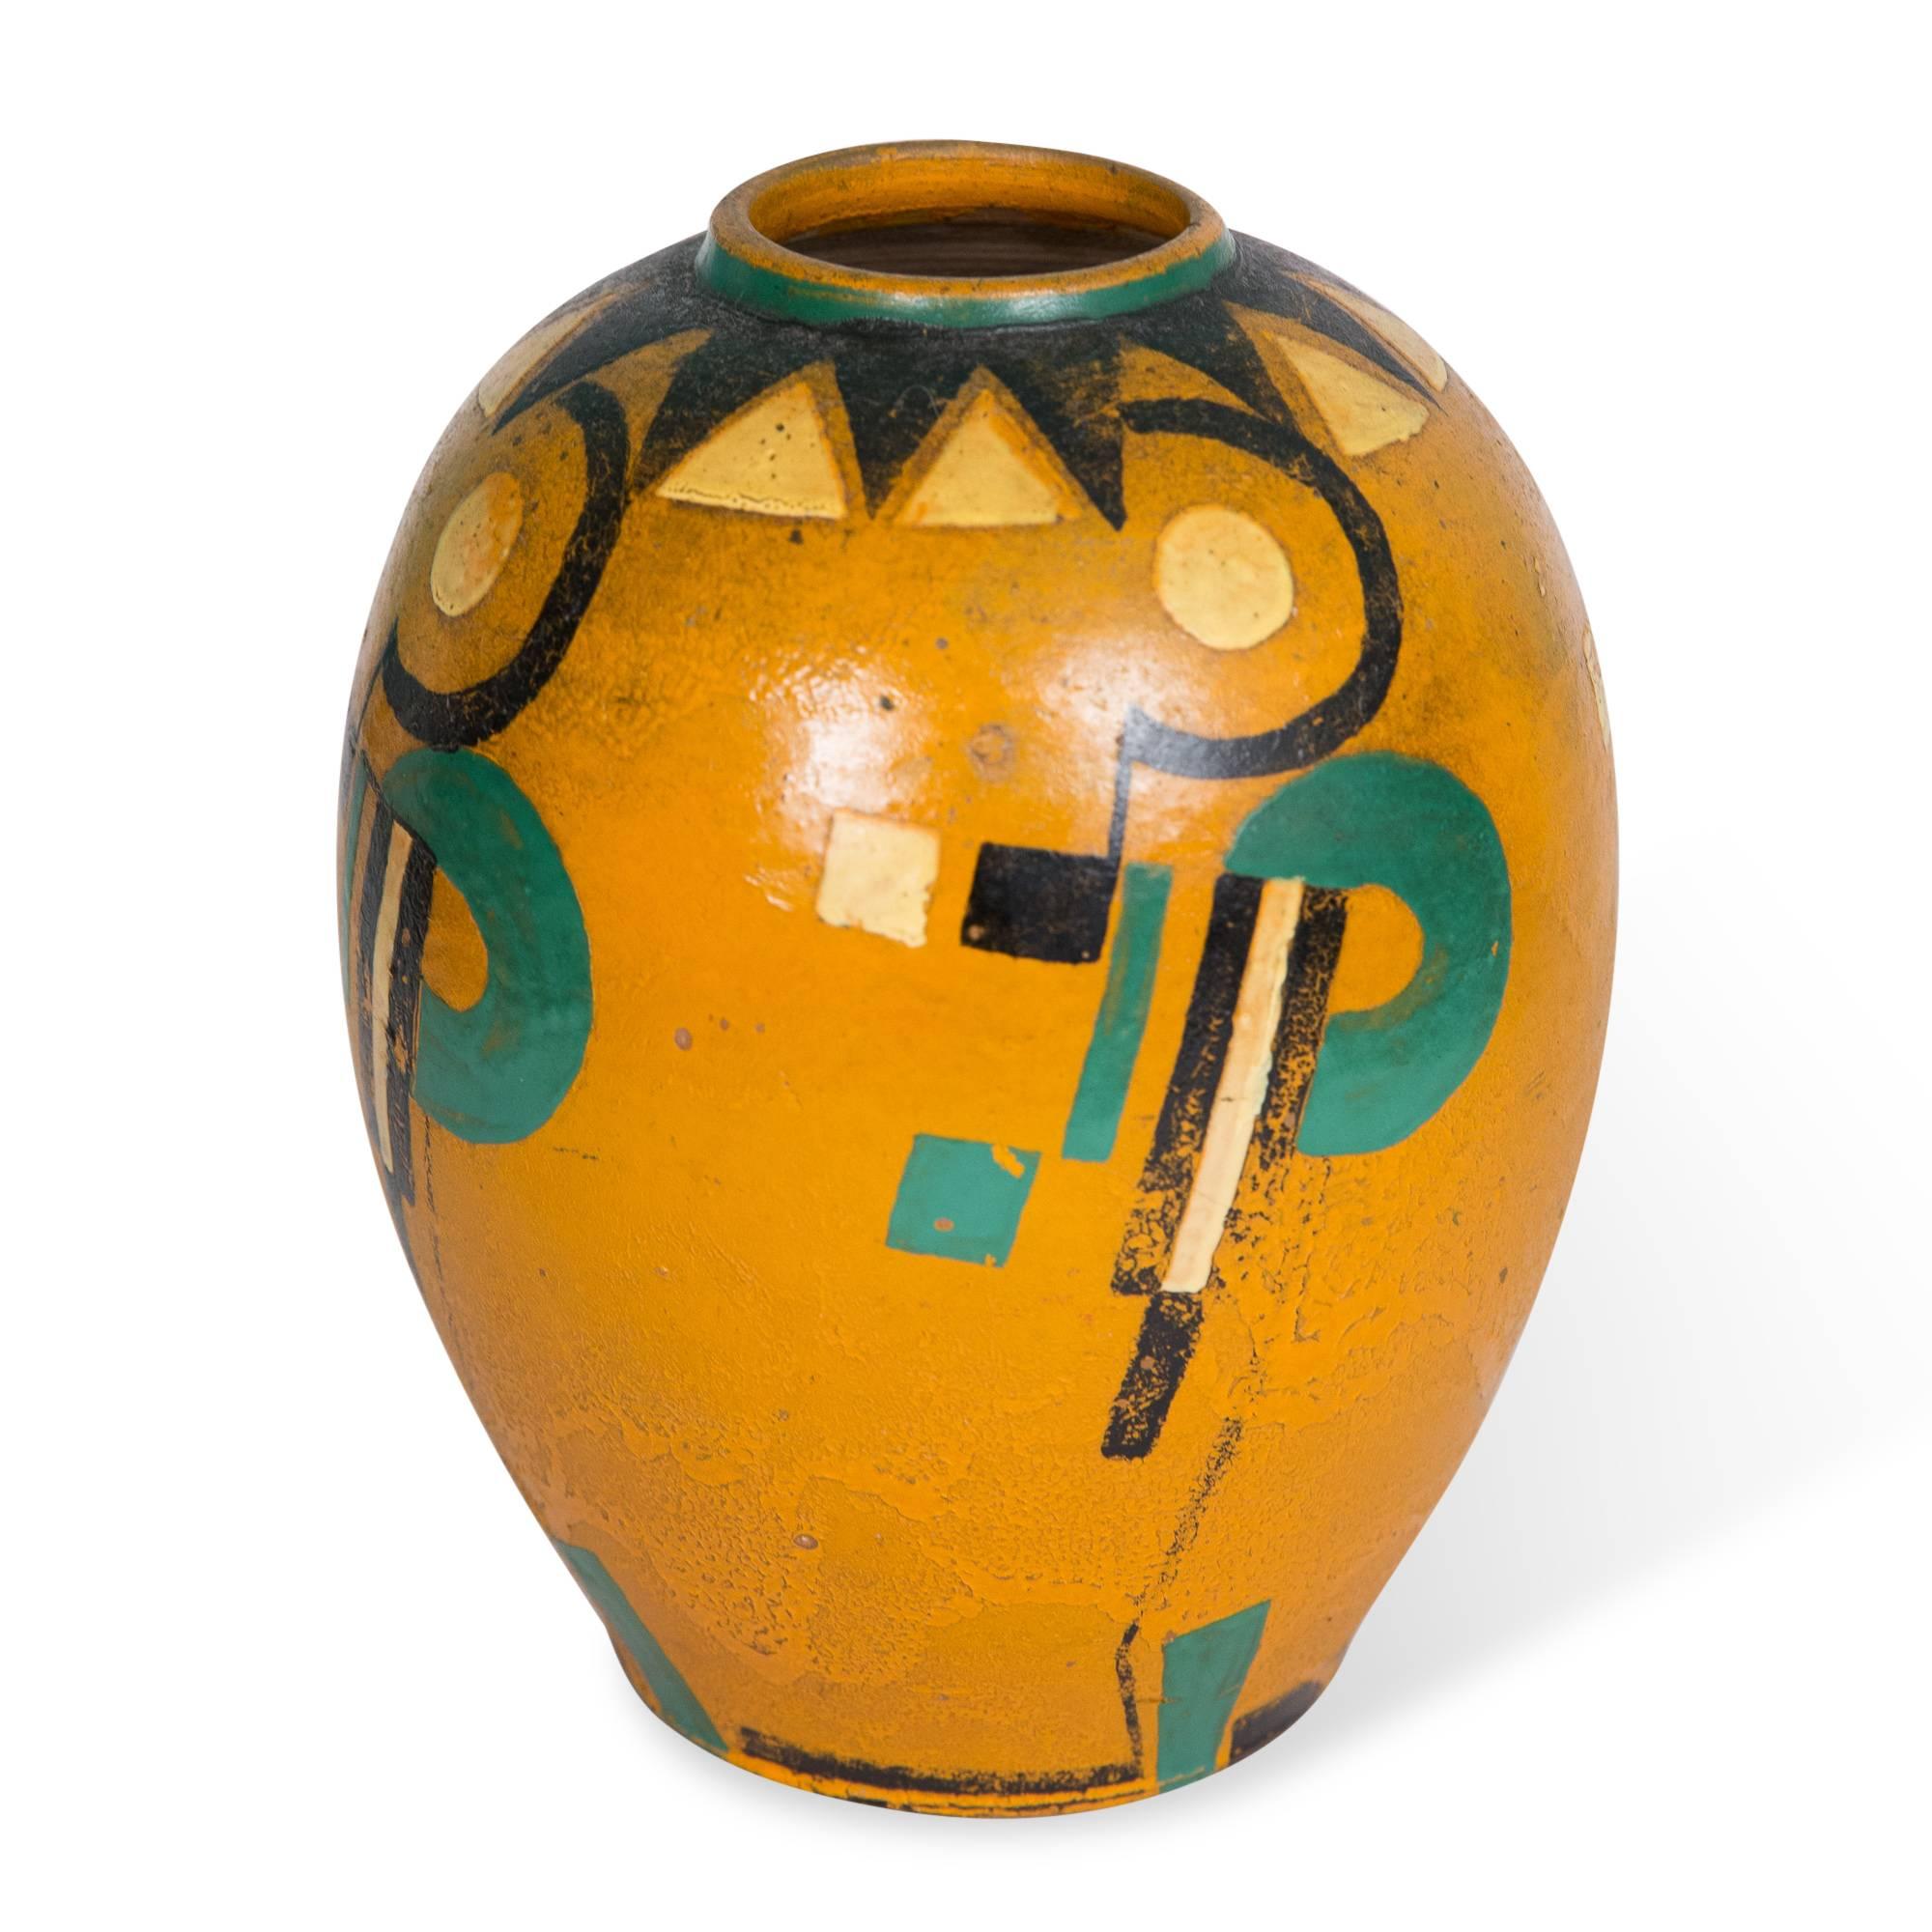 Bulbous form ceramic vase with Constructivist or Bauhaus style geometric decoration over the primarily orange glaze, Germany, circa 1930. Unsigned. Measures: Height 9 1/2 in, largest diameter 7 in, diameter of opening 2 1/2 in. (sats)